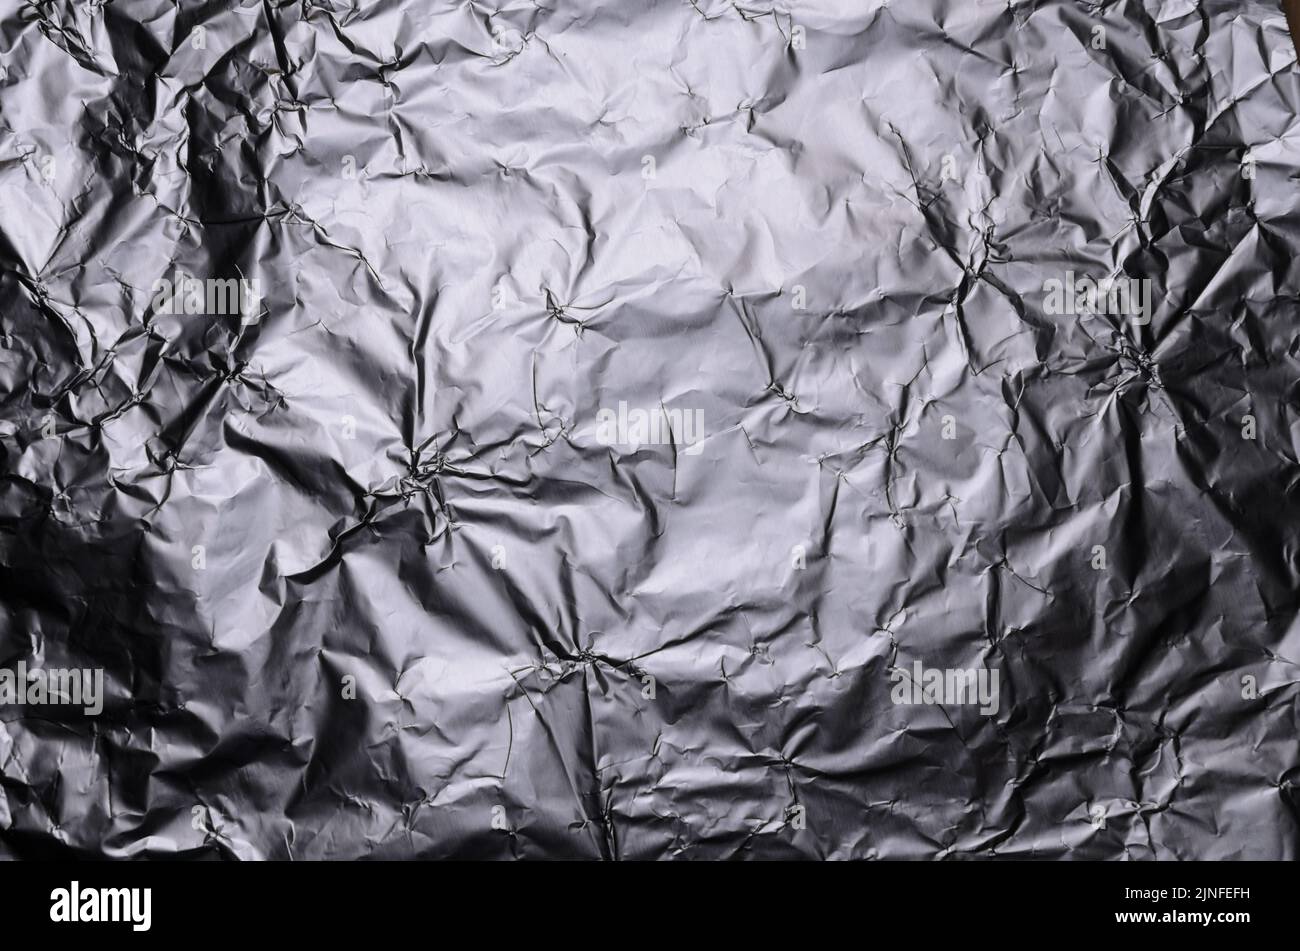 Abstract background of crumpled silver aluminium foil, flat lay view from directly above Stock Photo